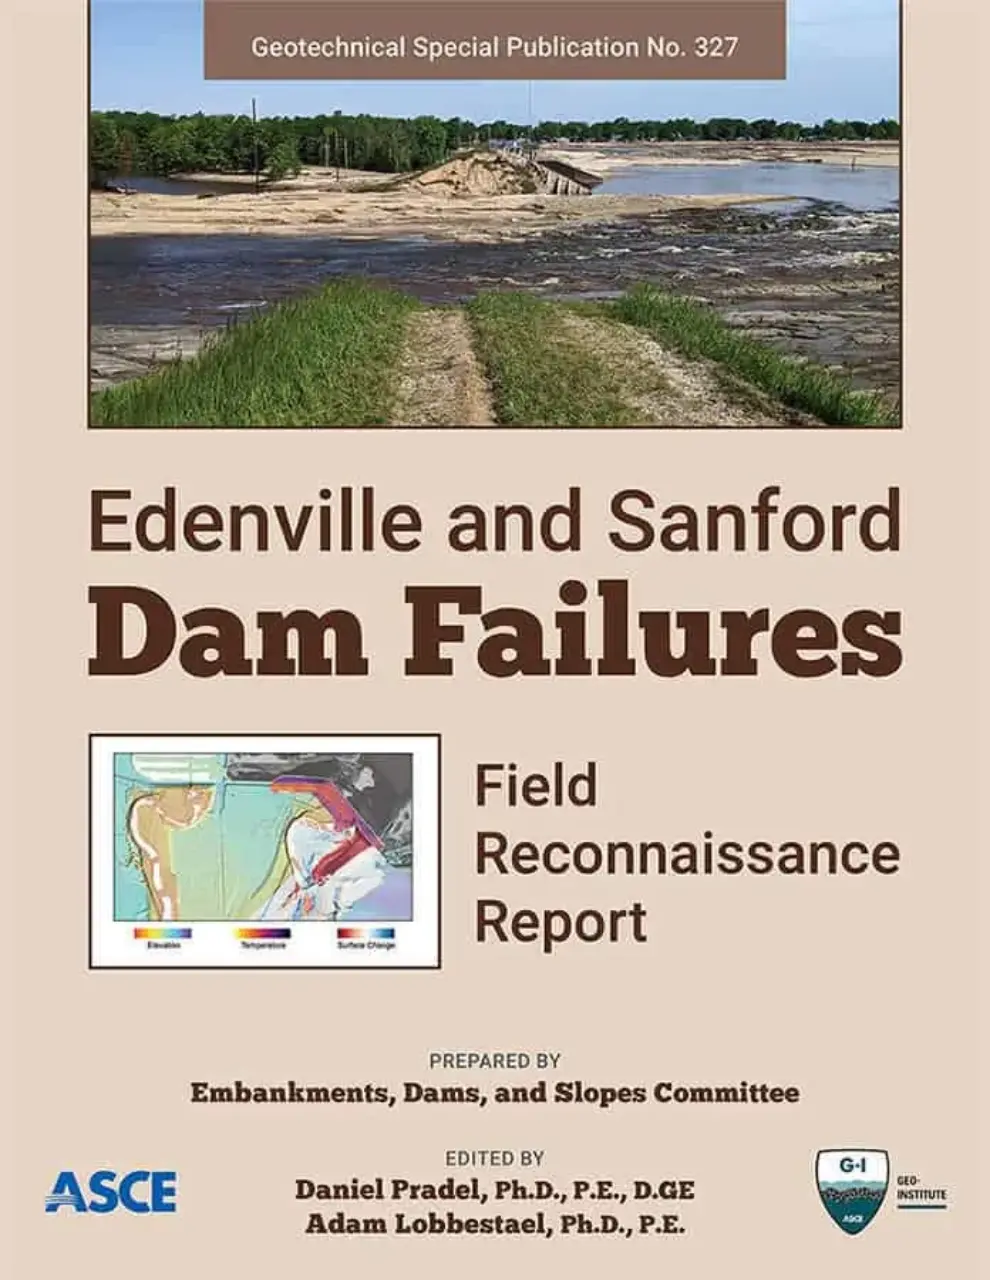 New ASCE Geotechnical Publication Examines Two Recent Dam Failures